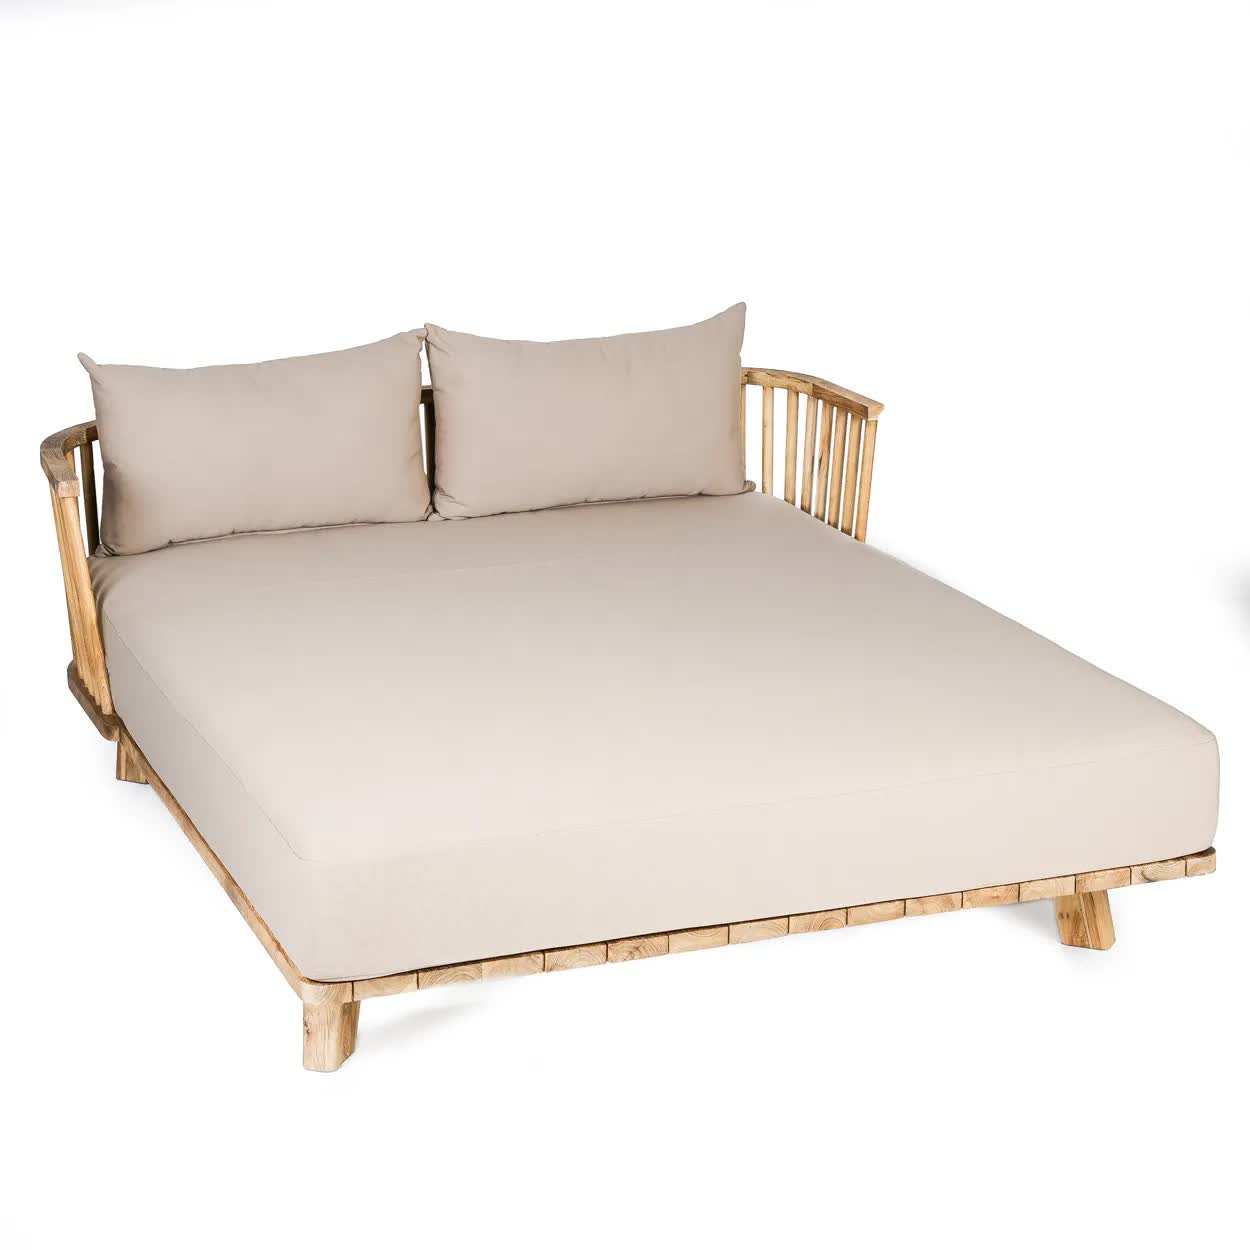 THE MALAWI Double Daybed Natural Sand